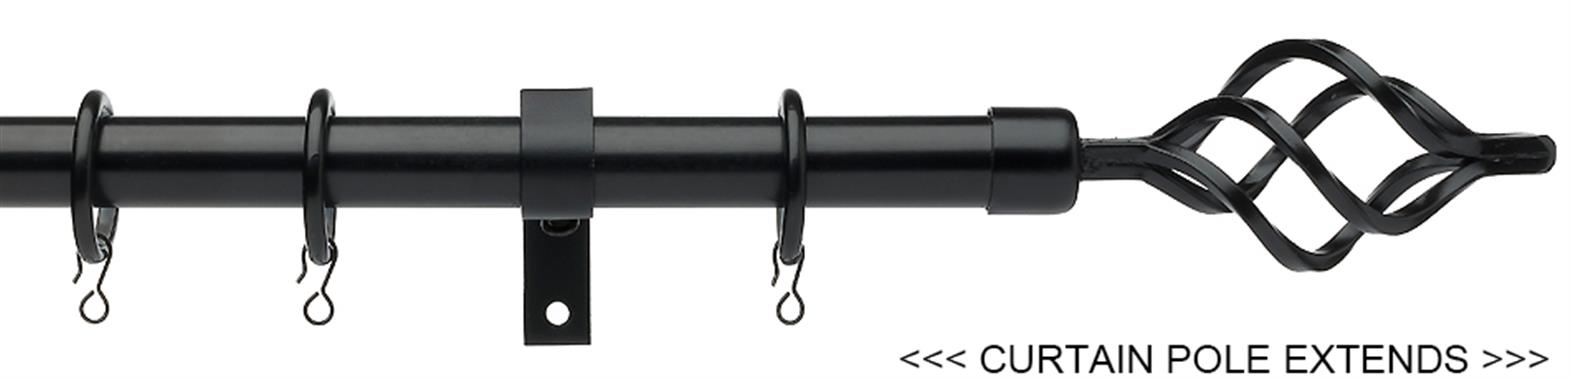 Universal 25/28mm Metal Extendable Curtain Pole, Black, Cage